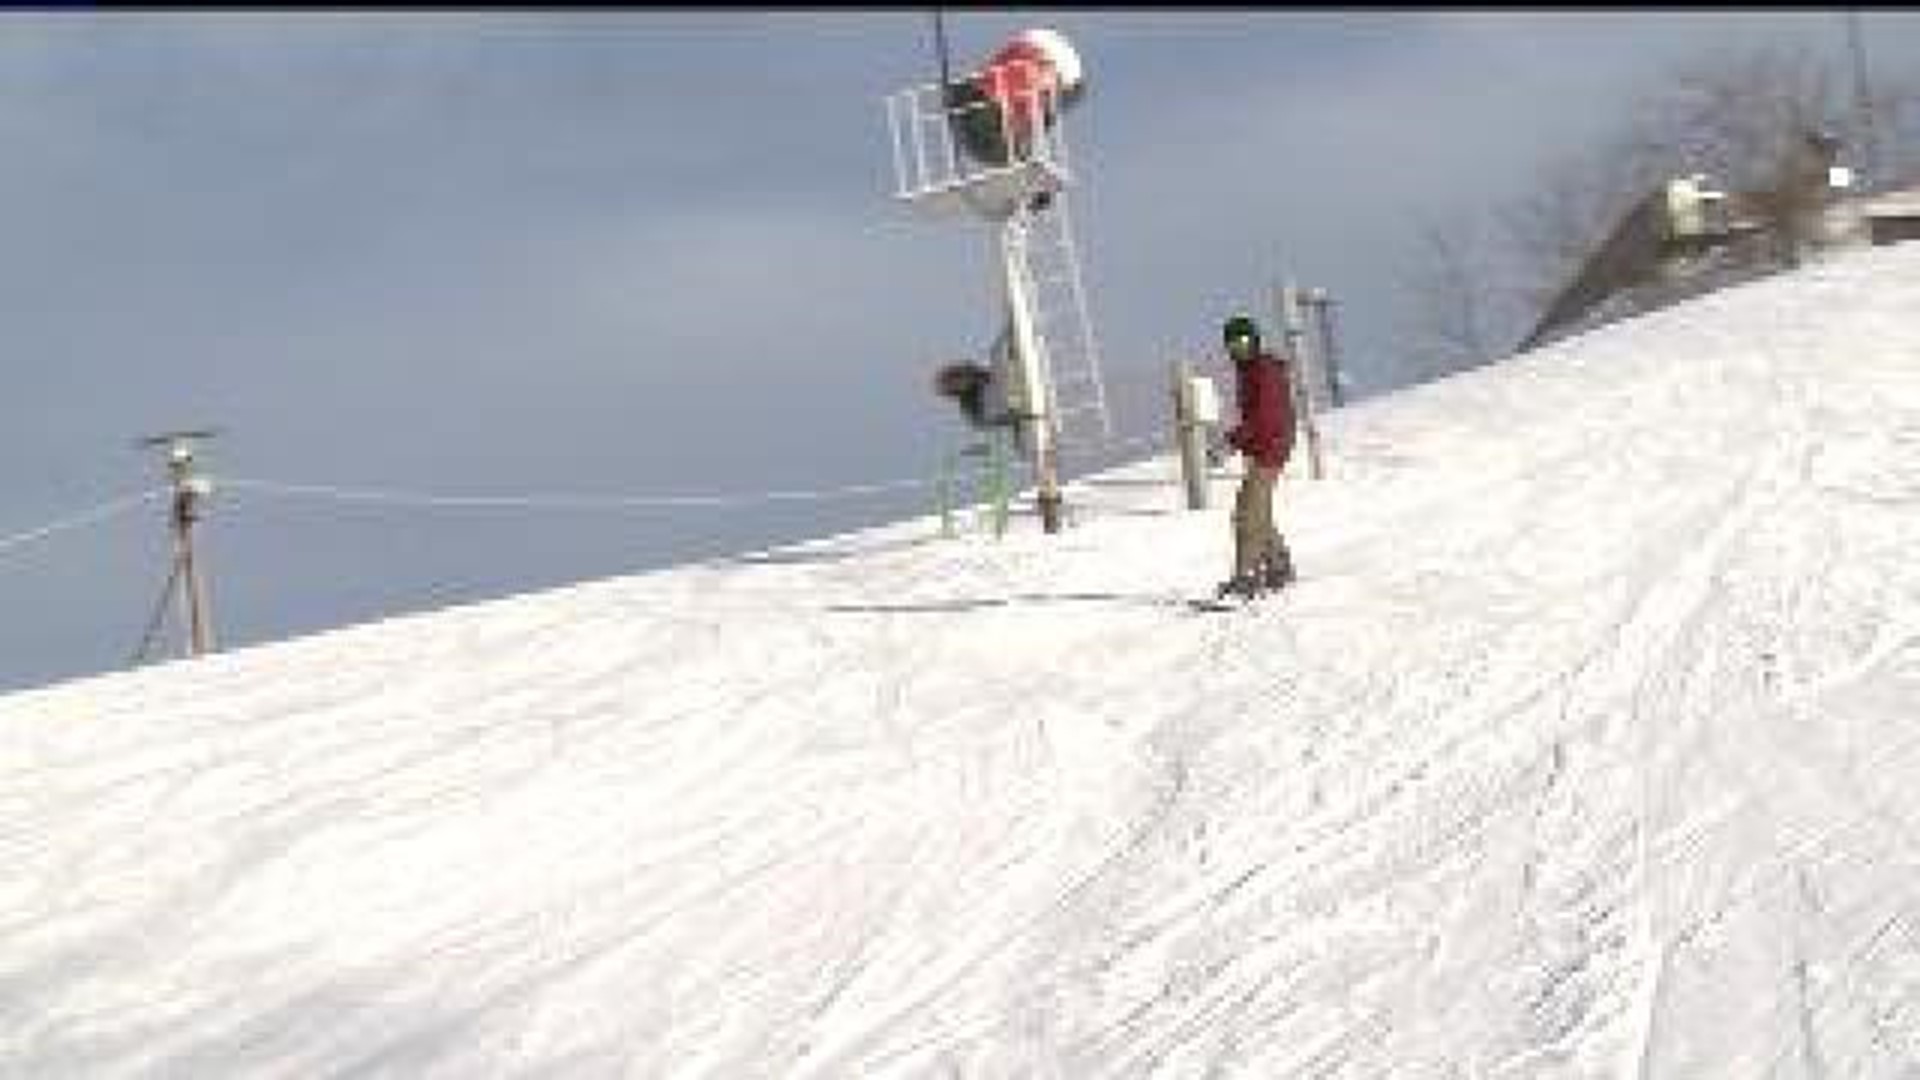 Ski Snowstar offers discount lift tickets to help feed the hungry